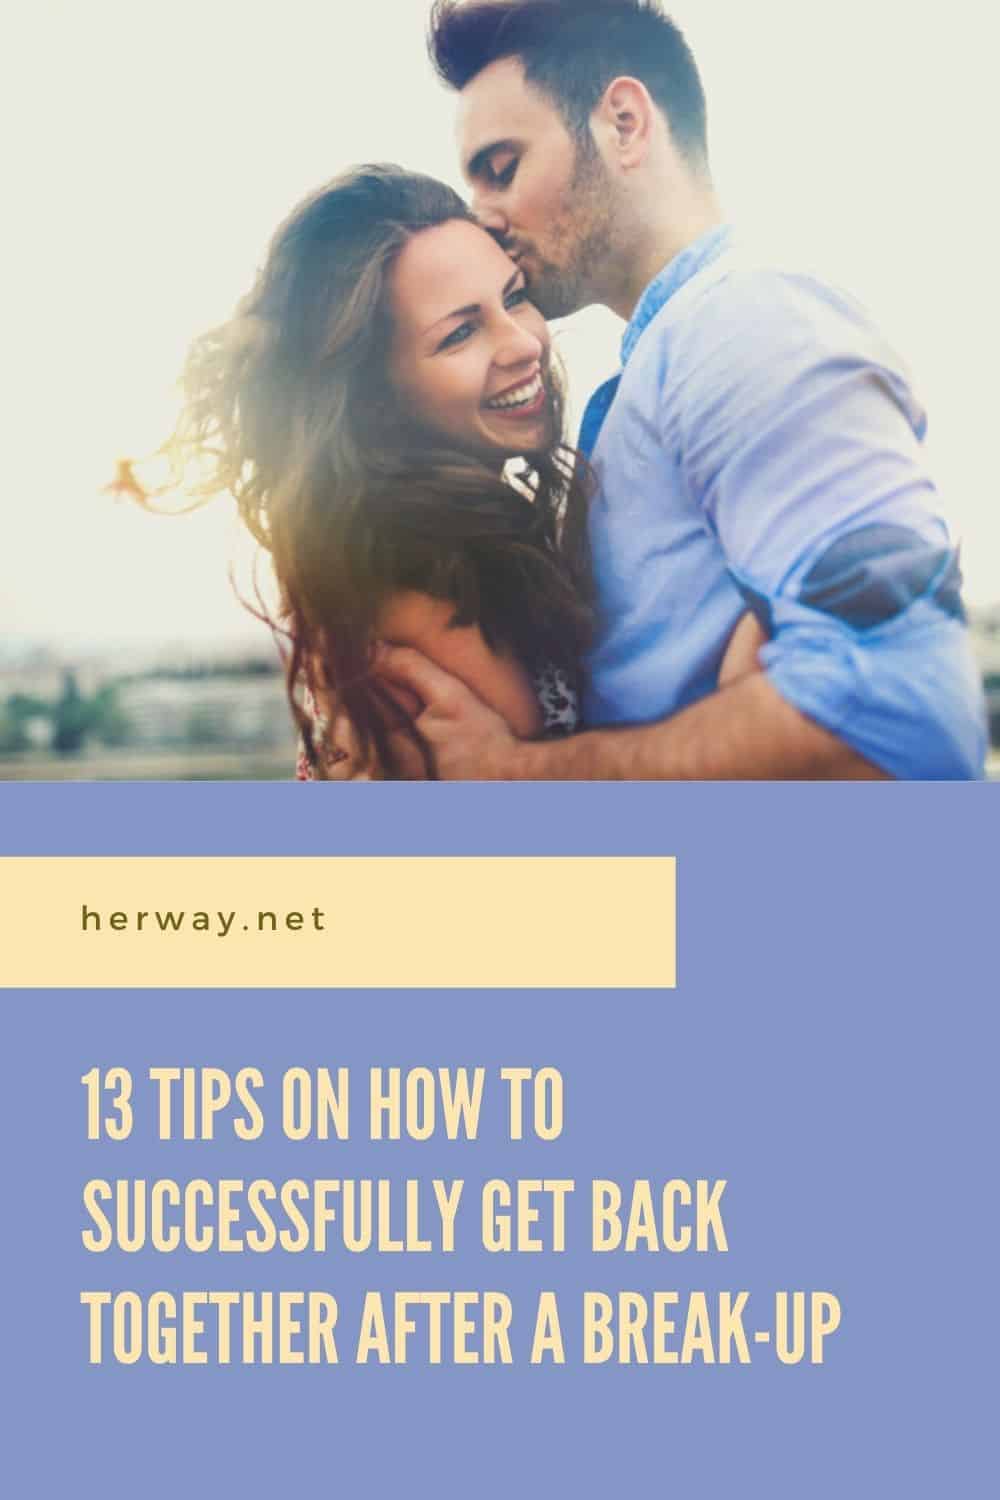 13 Tips On How To Successfully Get Back Together After A Break-Up